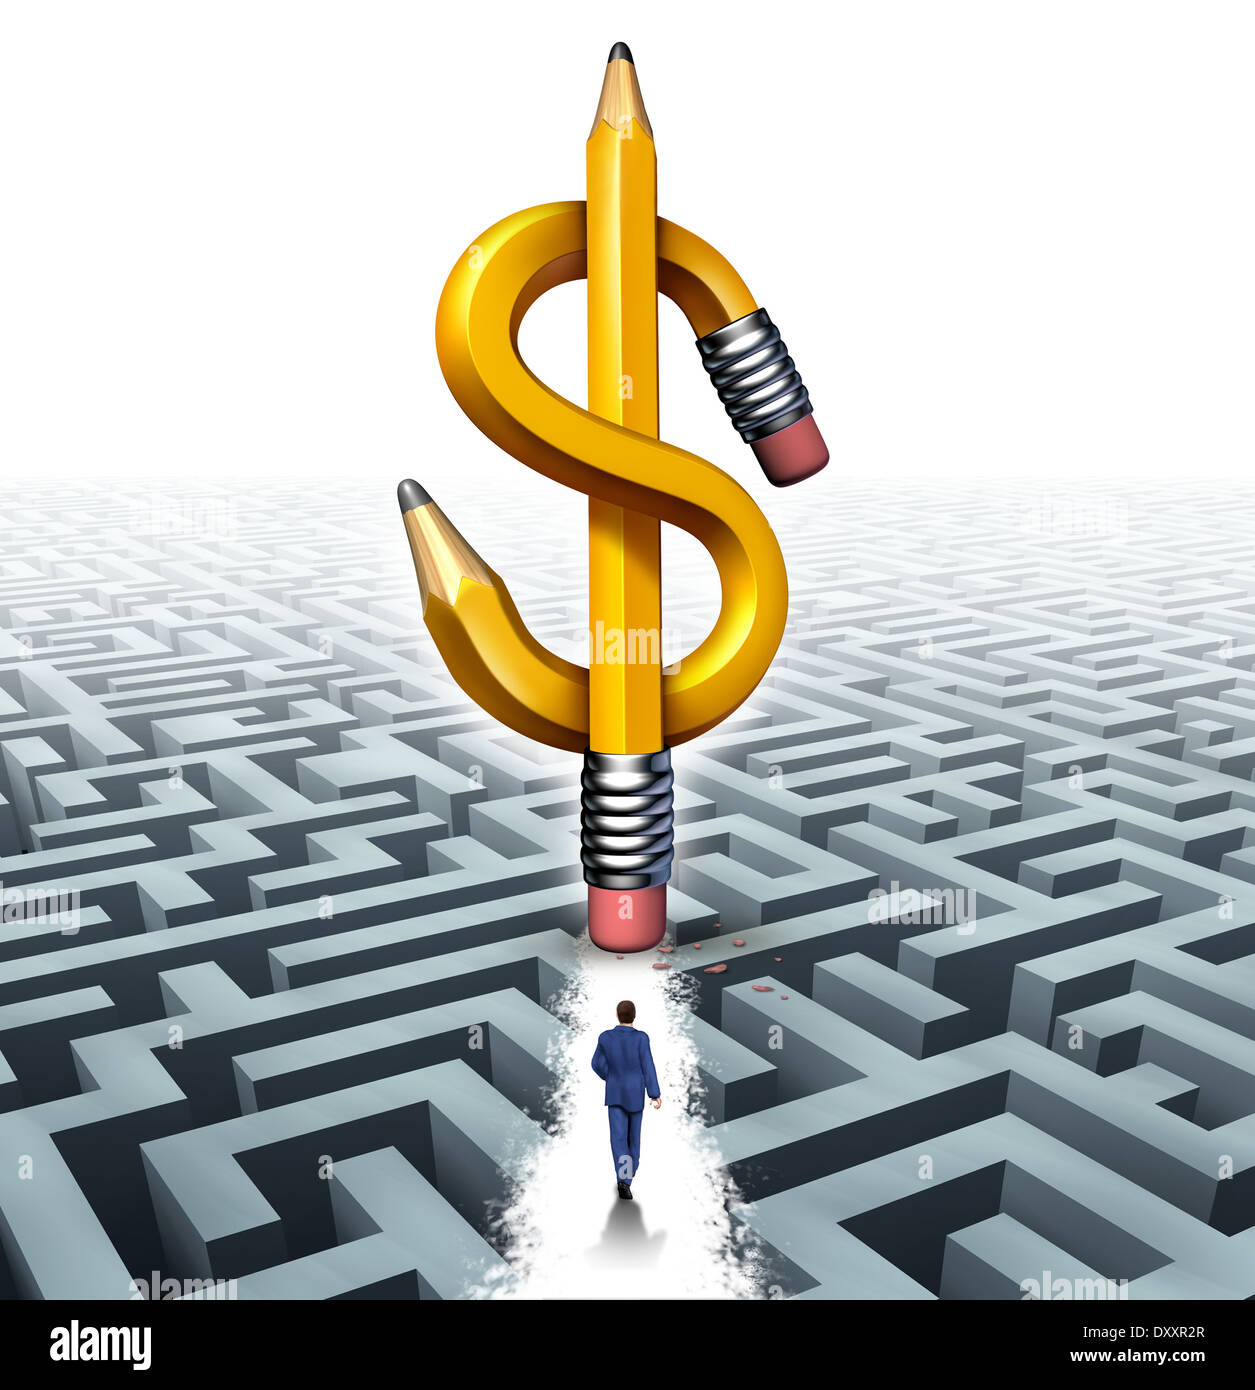 Wealth success solutions business concept as a businessman walking over a maze with a cleared path made by an eraser from a dollar shaped pencil as a metaphor for financial freedom guidance. Stock Photo